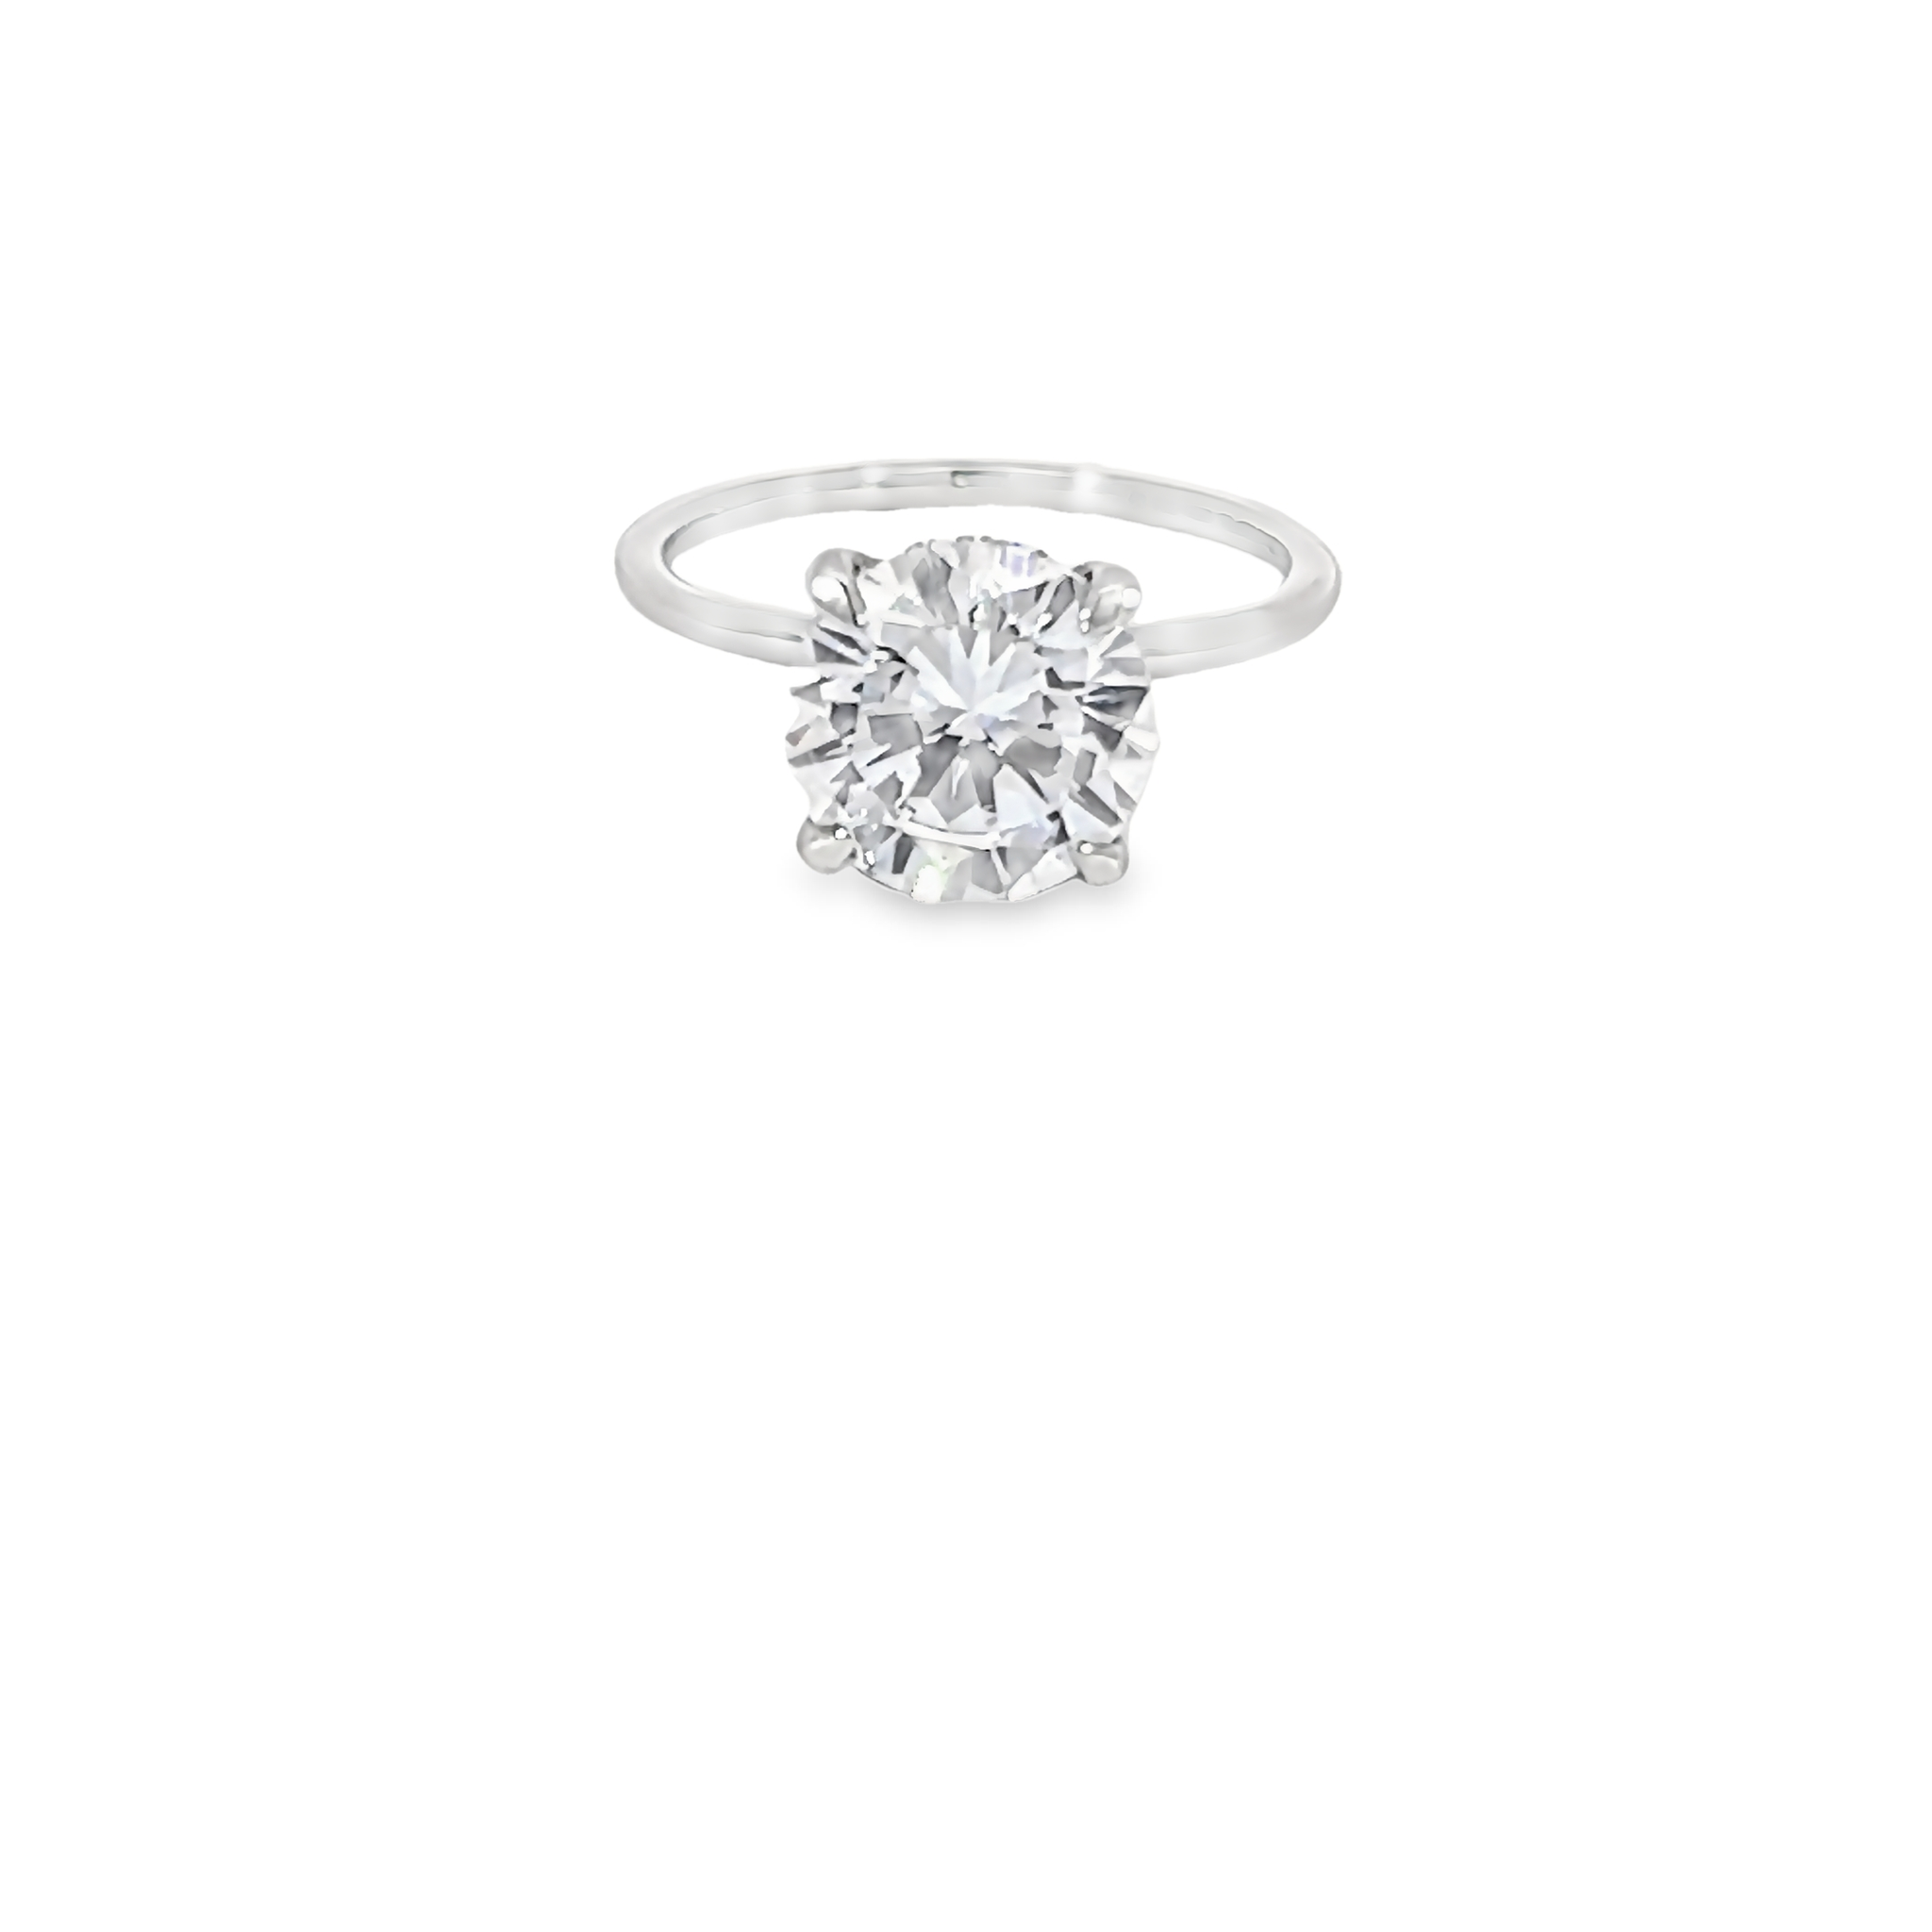 Platinum semi mount engagement ring with 16=0.13 total weight round brilliant G VS Diamonds. Size 7